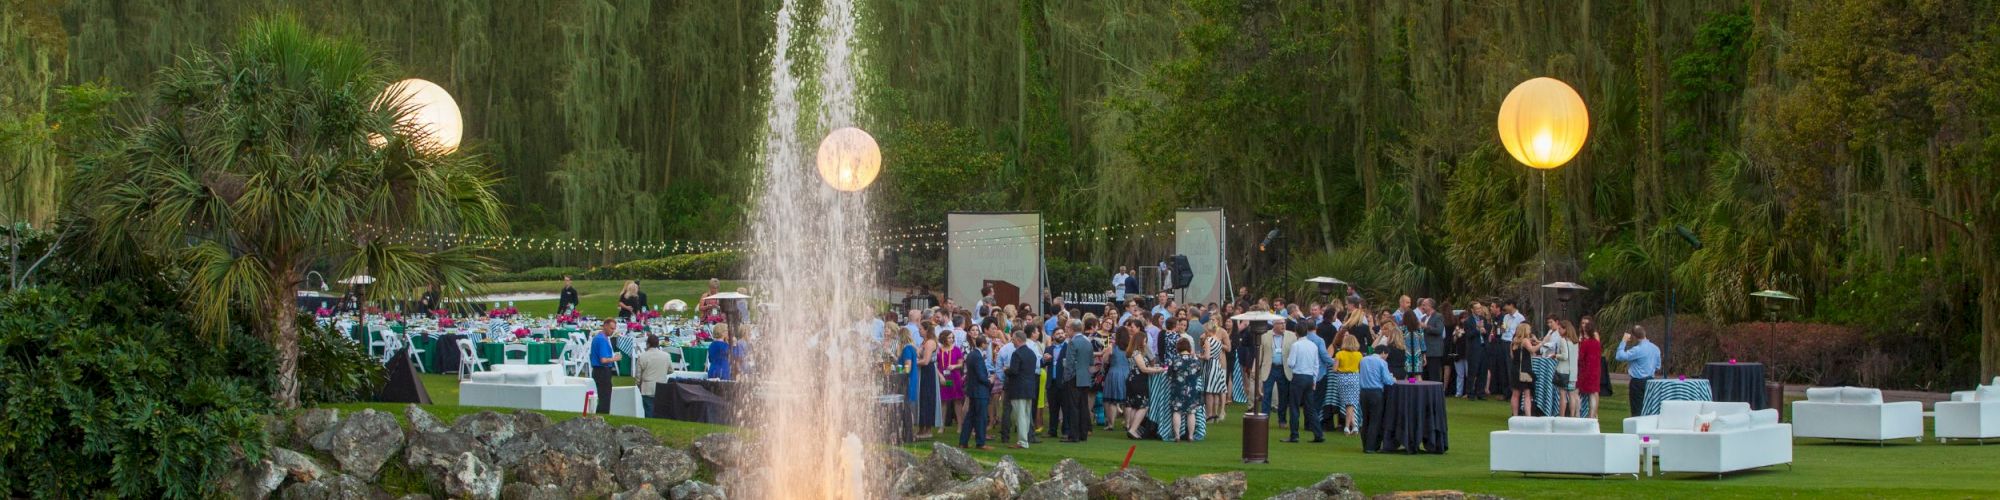 Outdoor event with a fountain, large group of people, string lights, tables, and illuminated orbs in a garden setting.